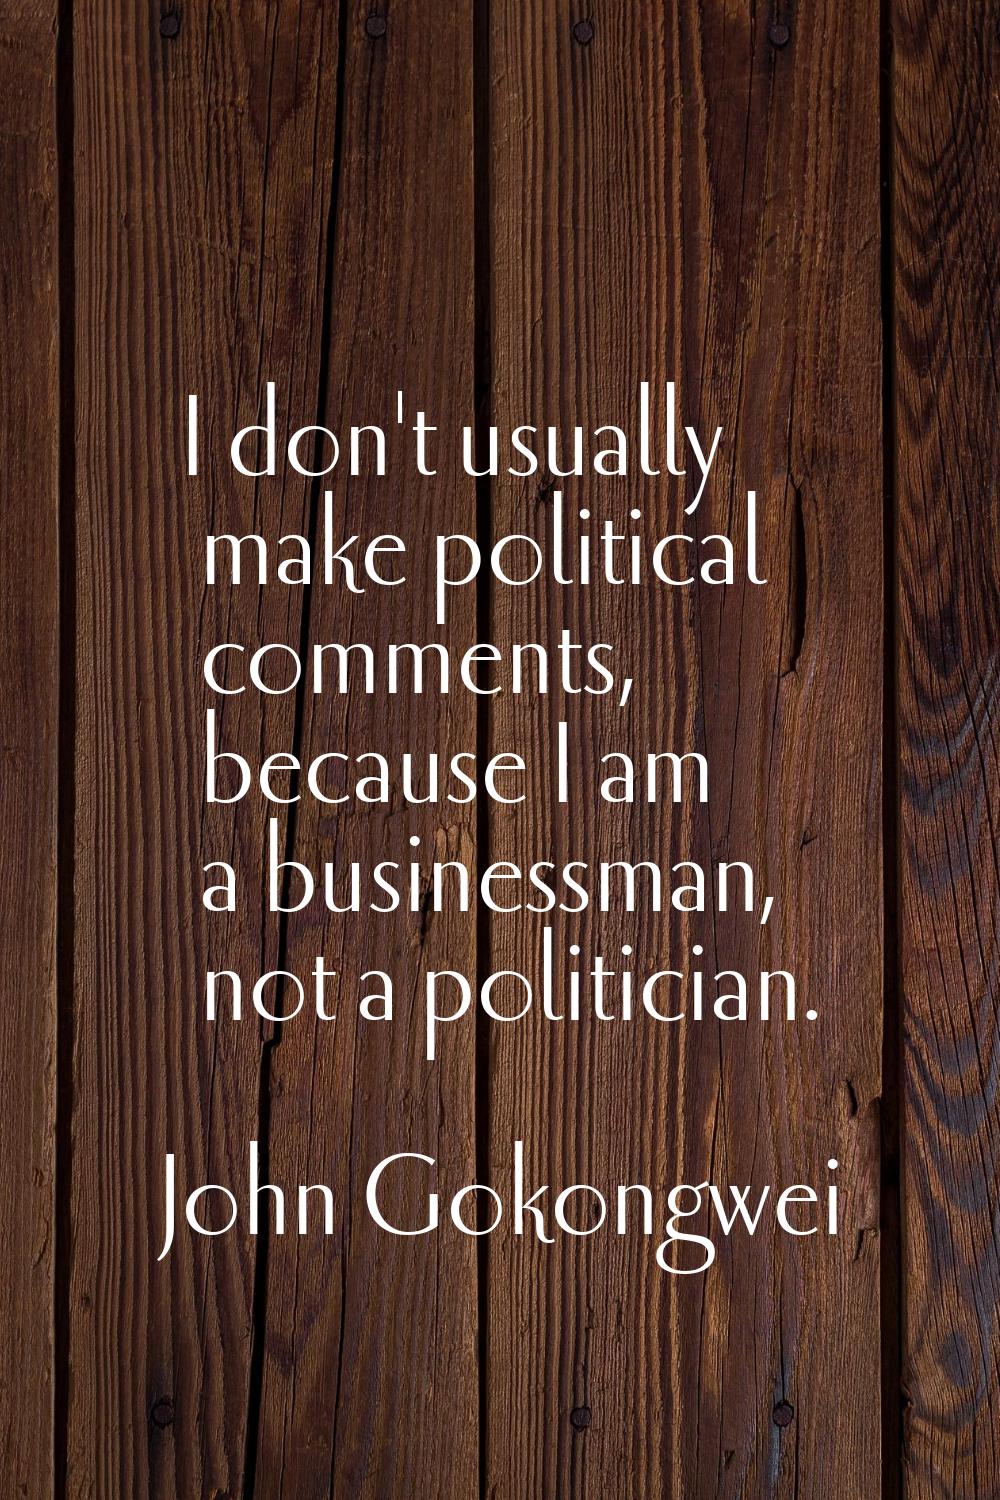 I don't usually make political comments, because I am a businessman, not a politician.